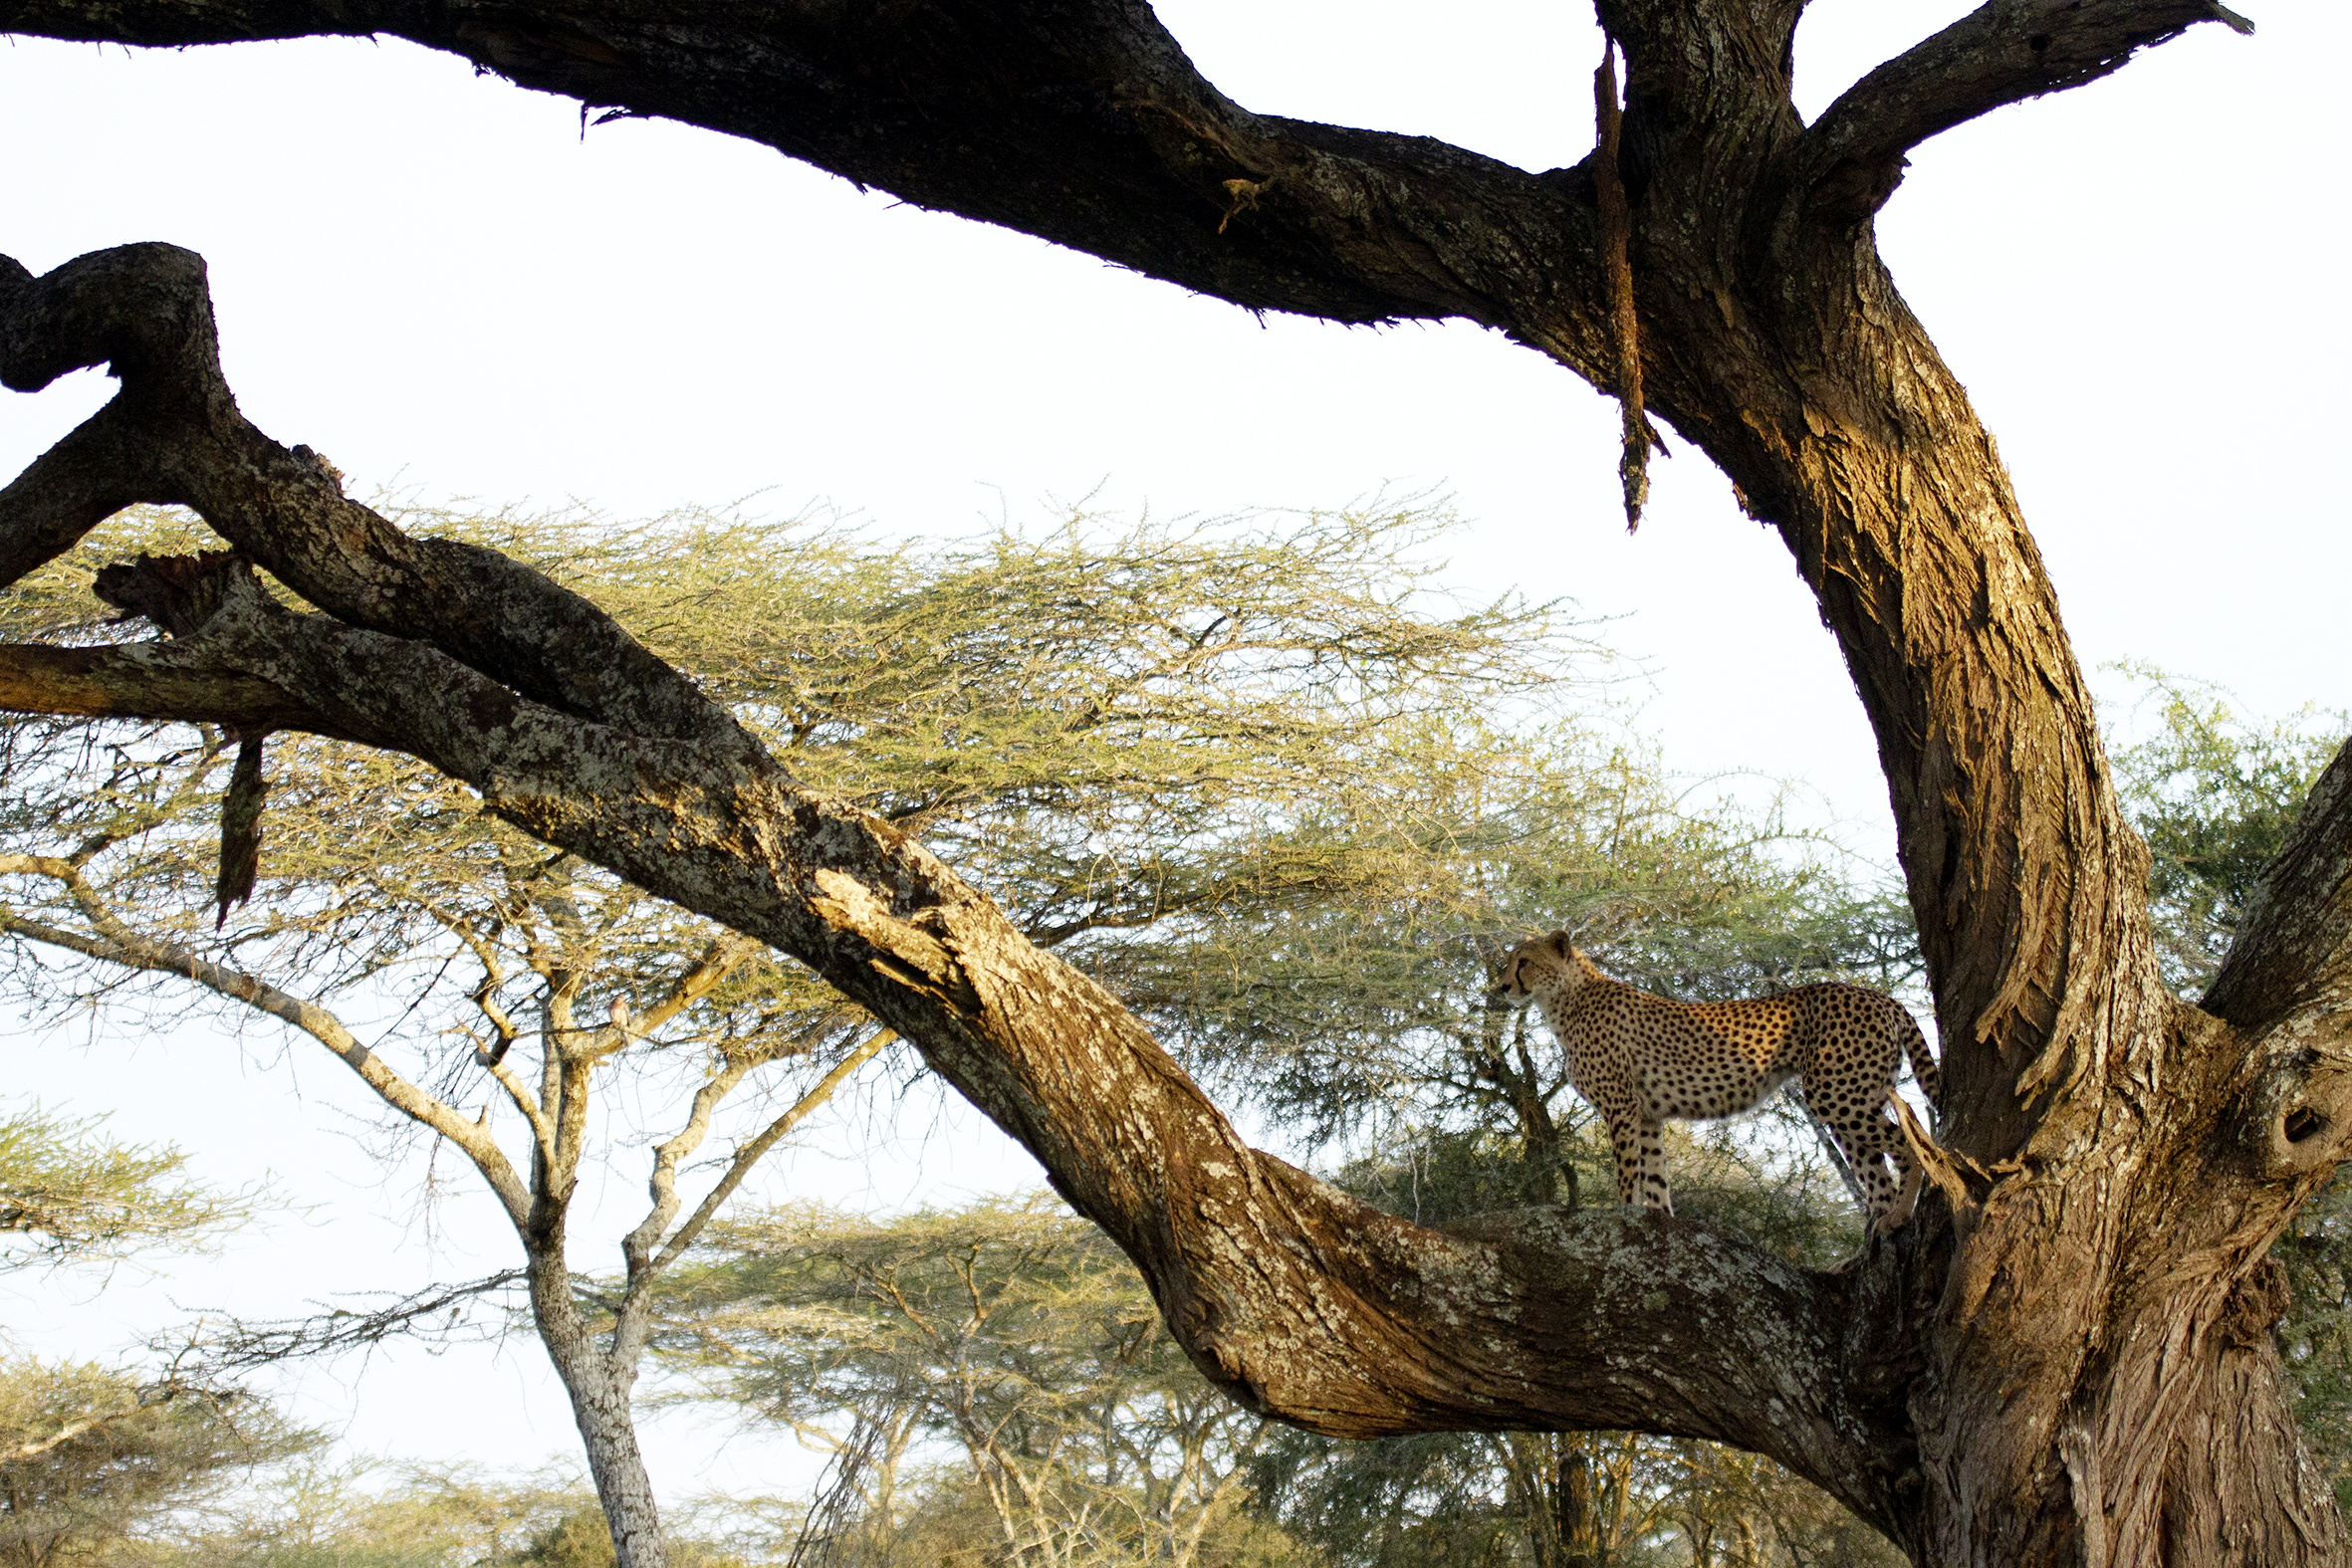 A cheetah looking a far from up a tree